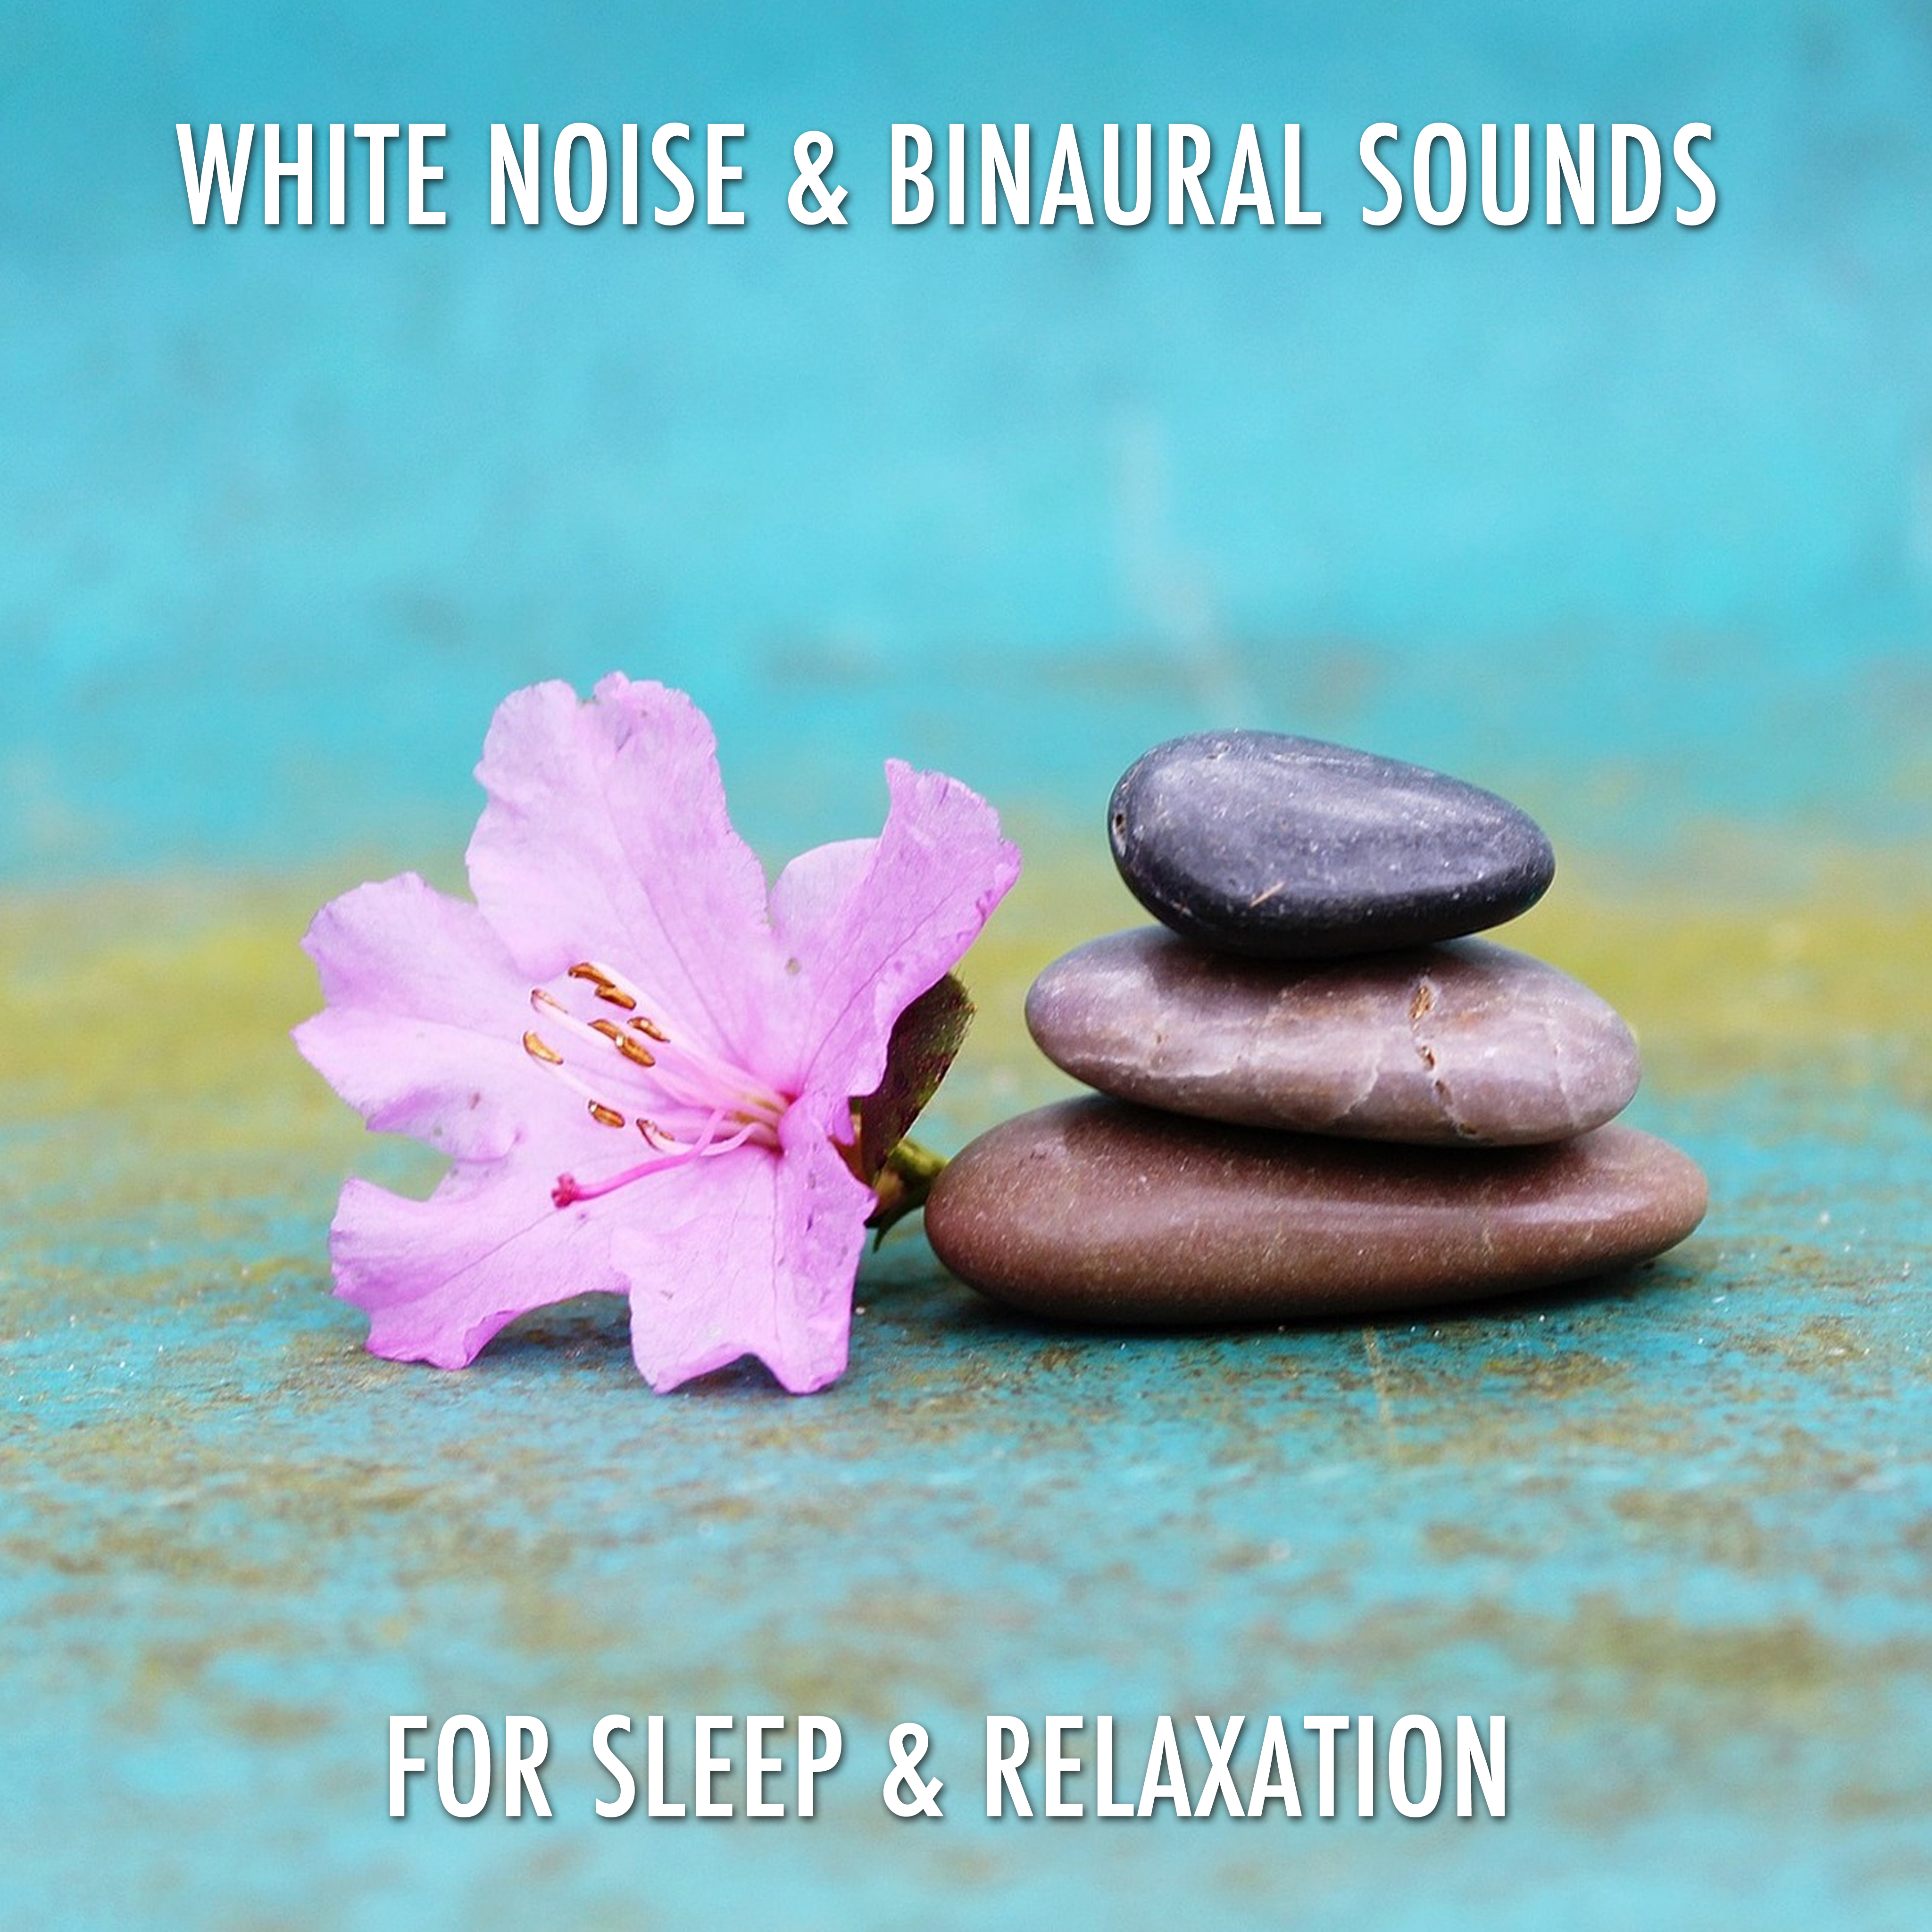 12 White Noise & Binaural Sounds for Sleep & Relaxation